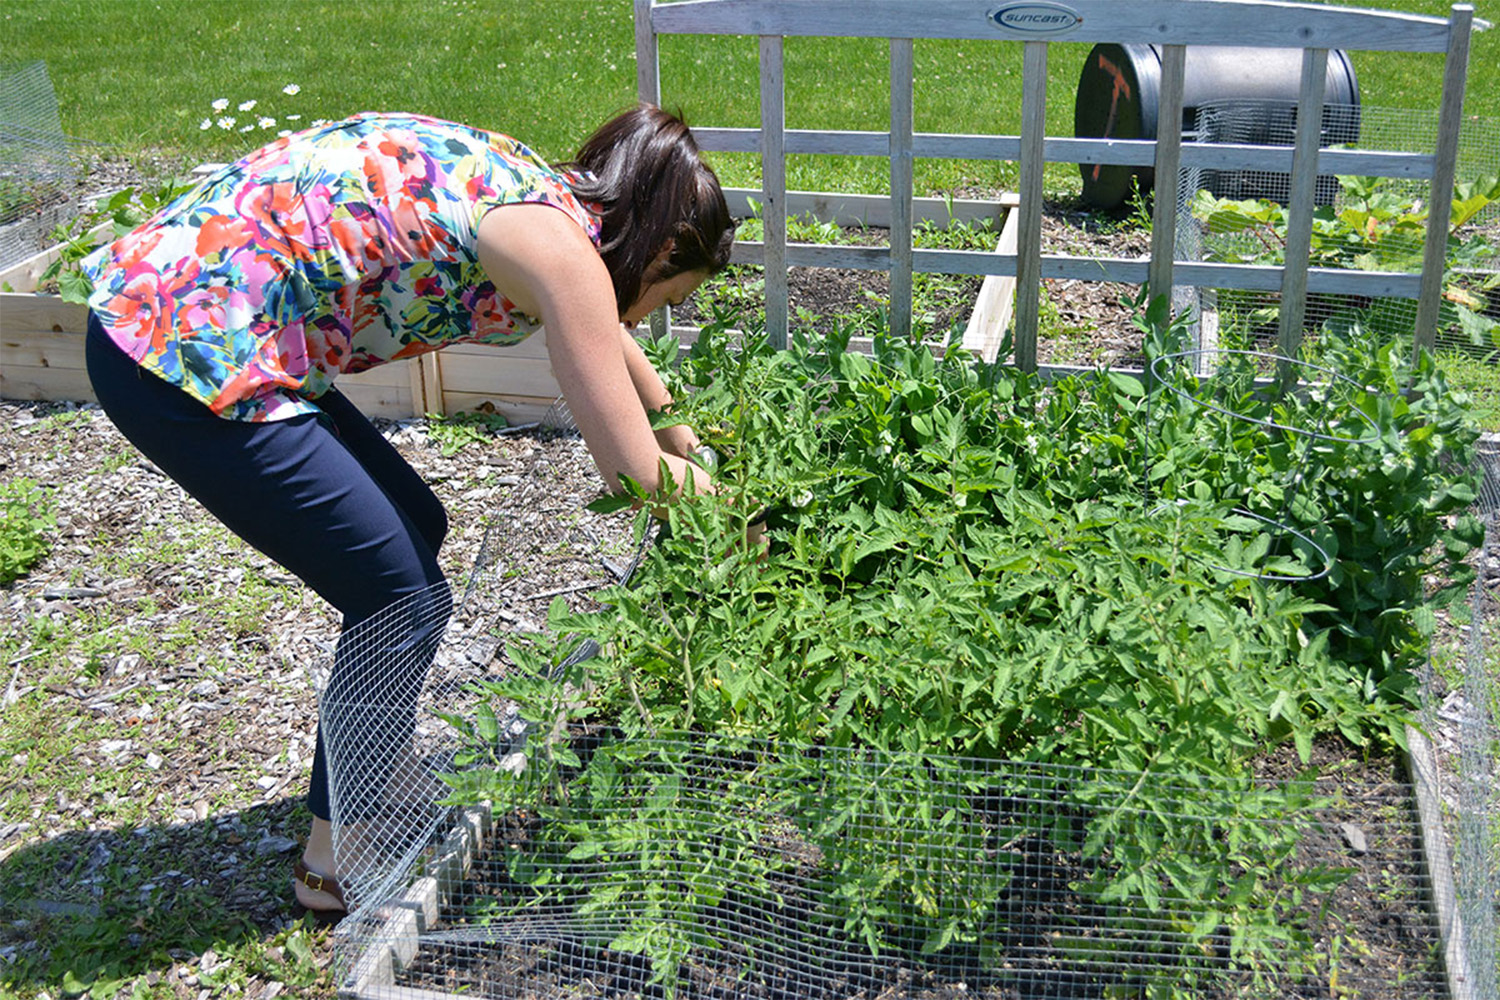 Katie inspects the peas to make sure they're not getting tangled with the tomatoes.